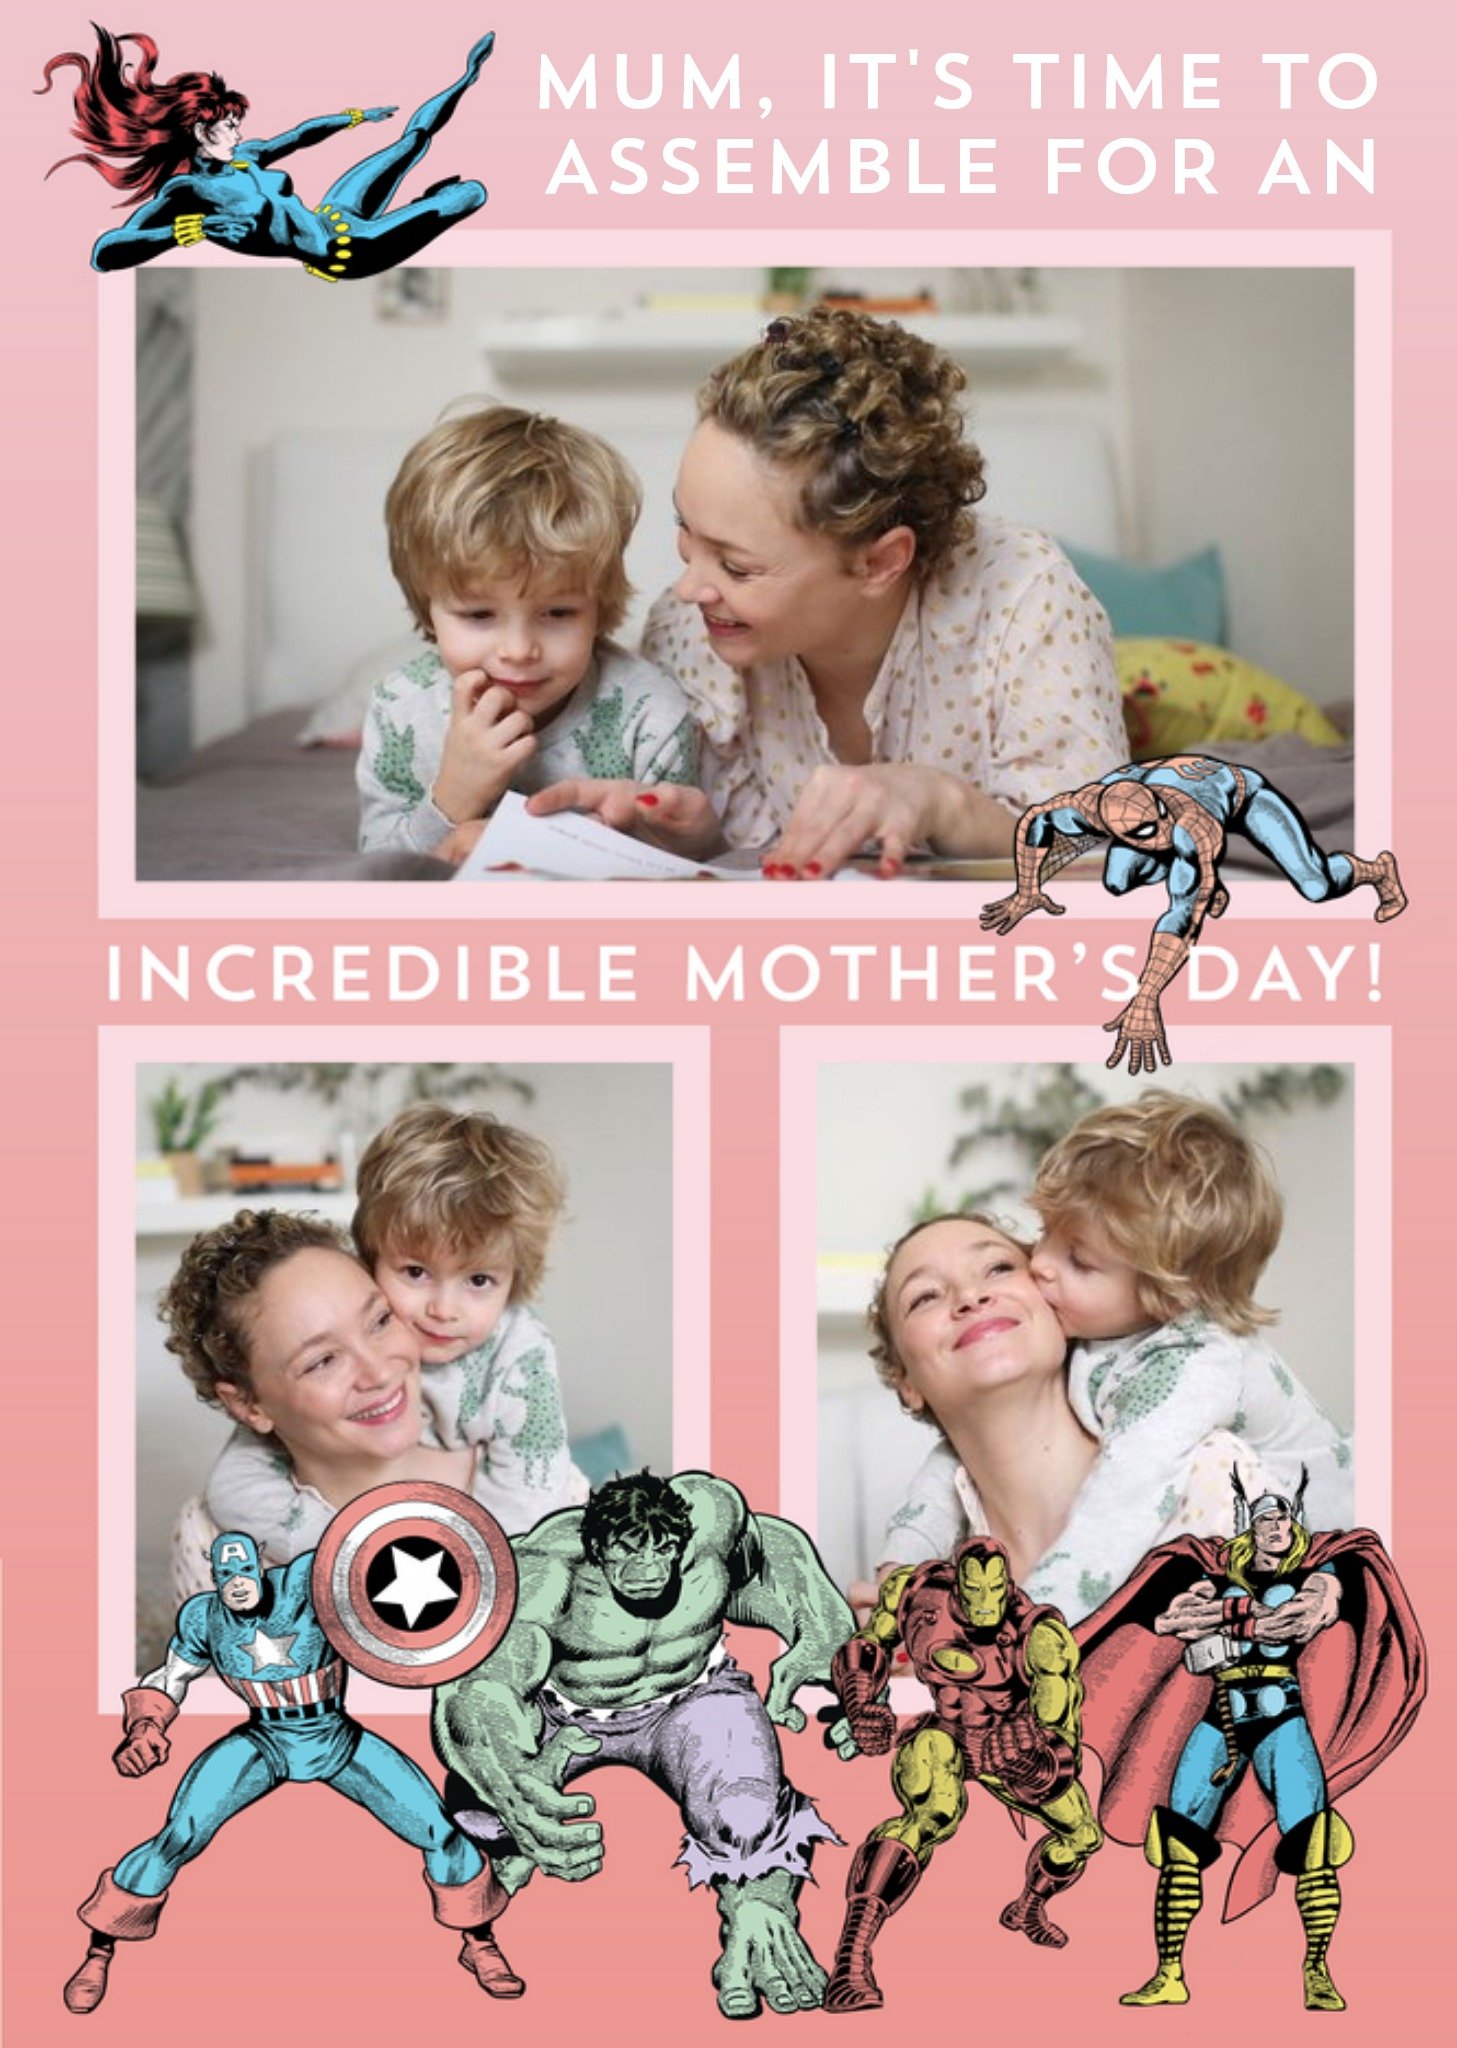 Marvel Superheroes Have An Incredible Mother's Day Card, Large